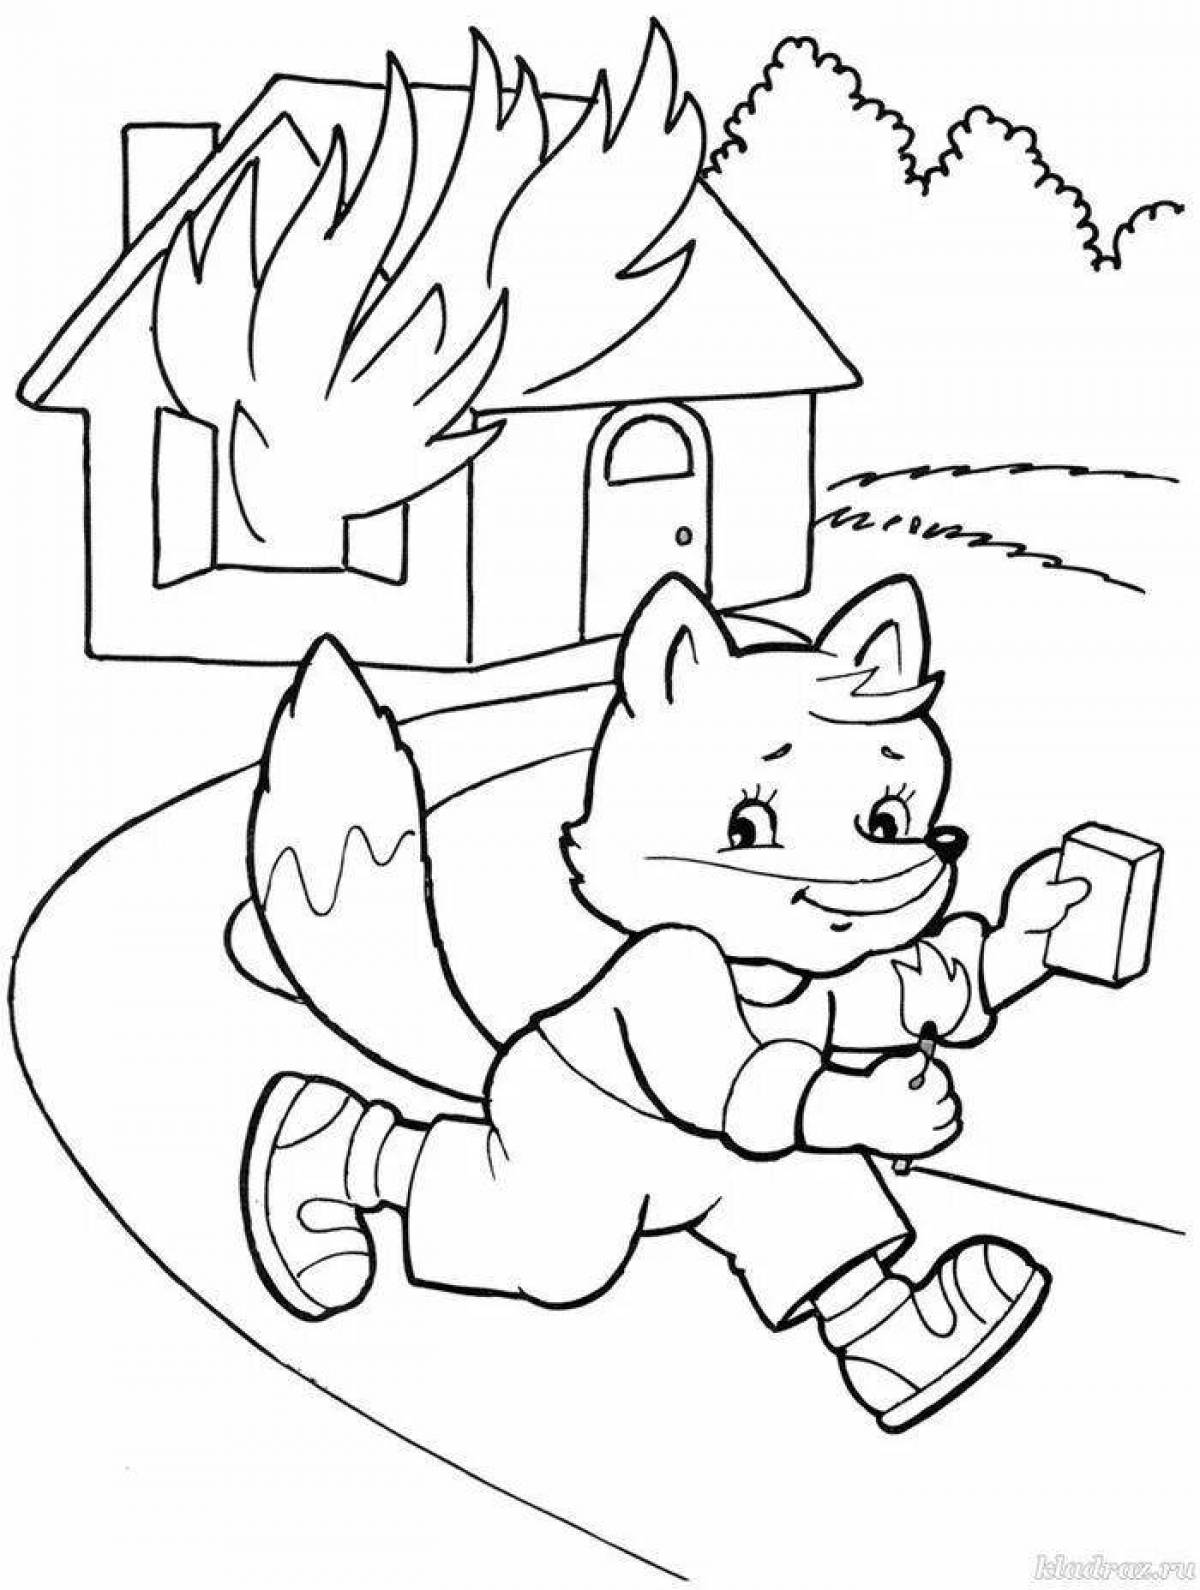 Tempting coloring pages for kids